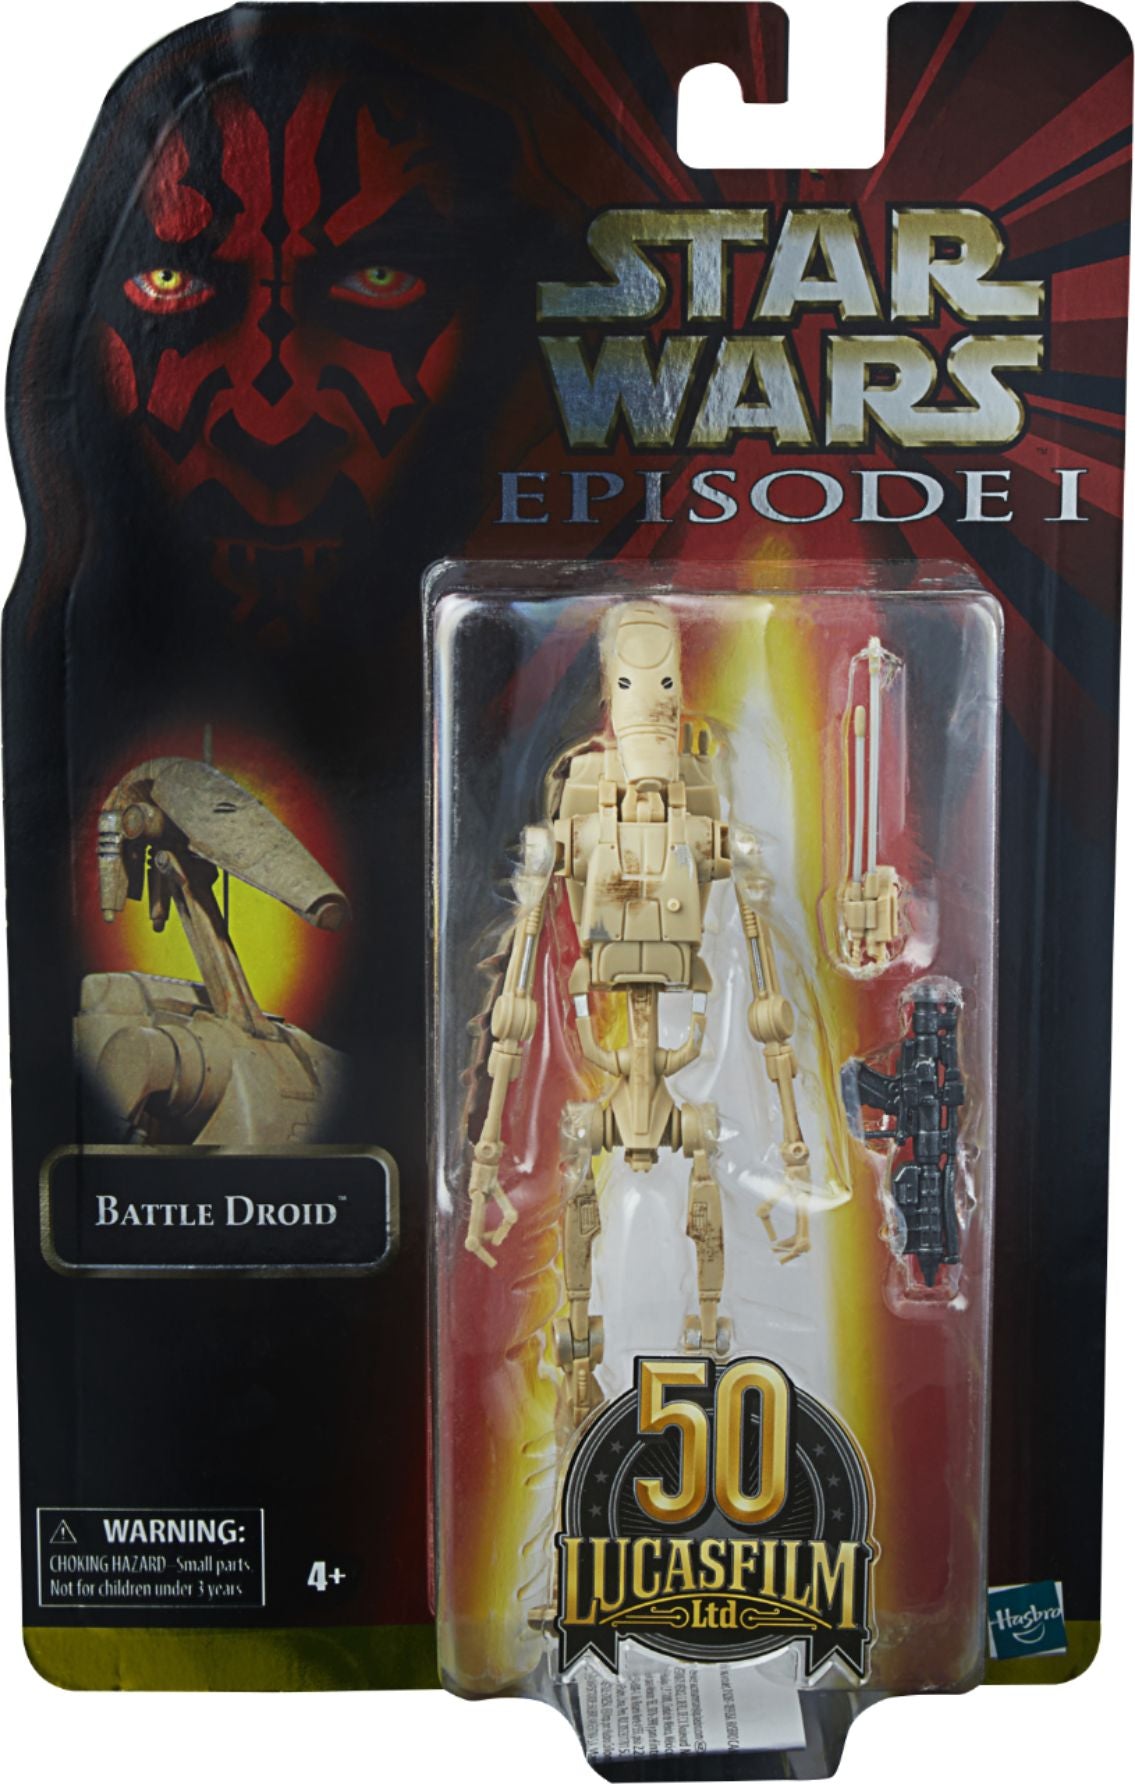 Hasbro Star Wars Black Series Lucasfilm 50th Anniversary Episode I Battle Droid 6 Inch Action Figure